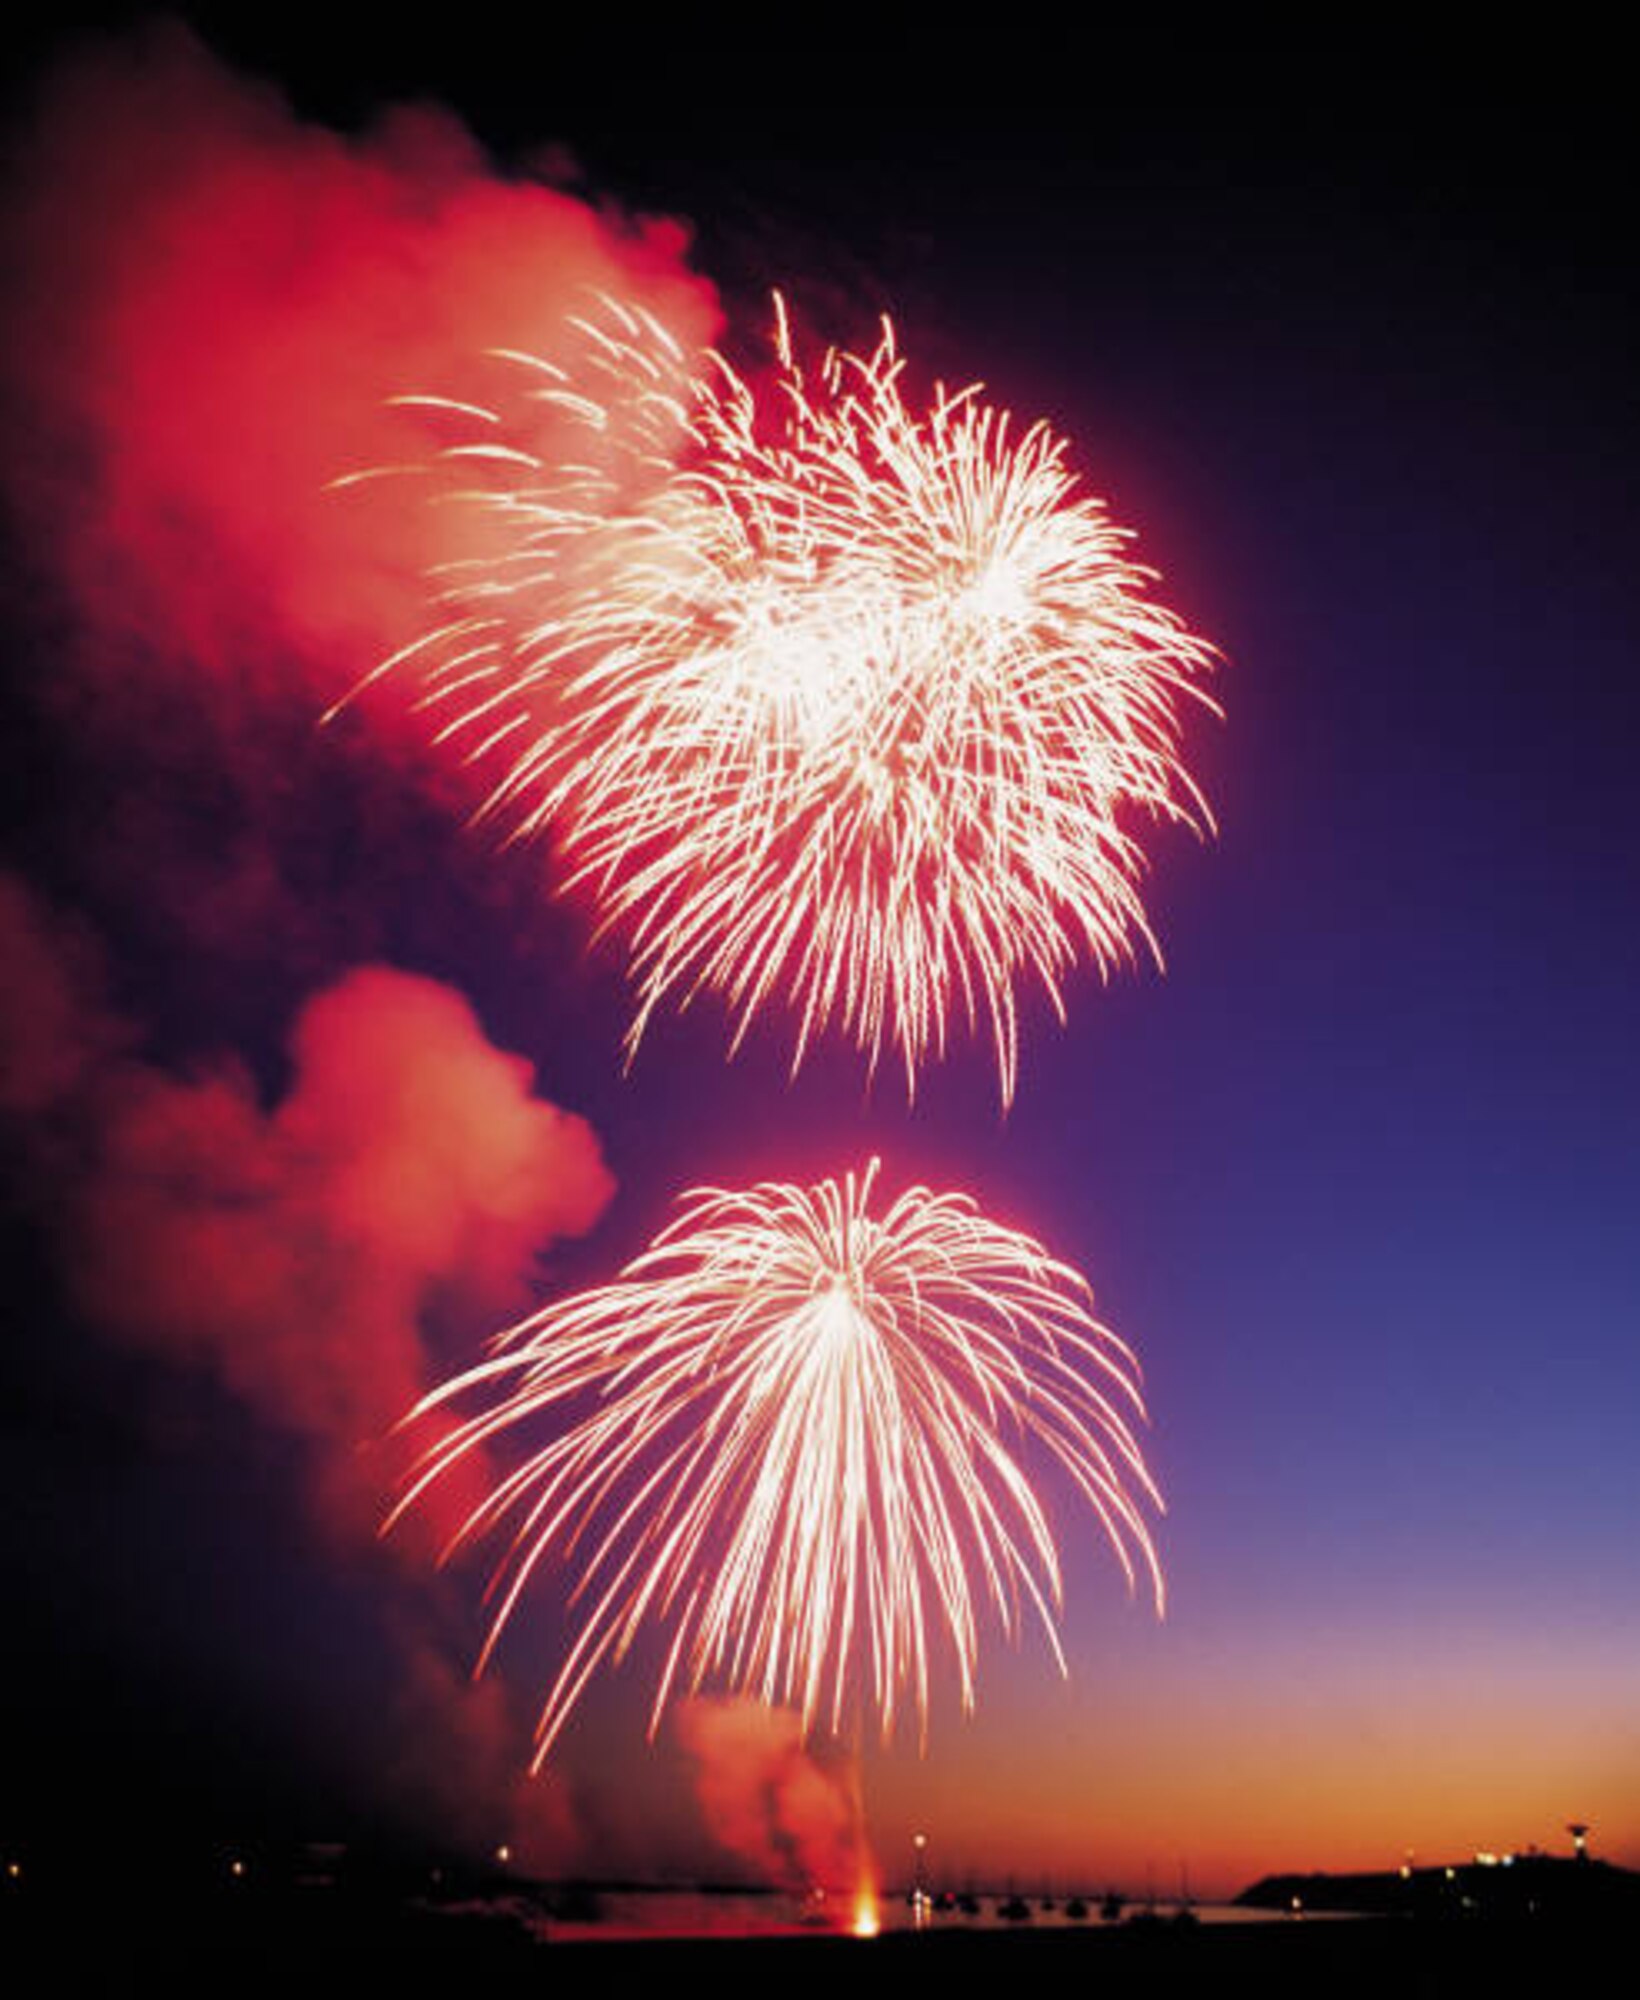 The best option to ensure a safe 4th of July holiday is to avoid the personal use of fireworks and attend a professional fireworks display.